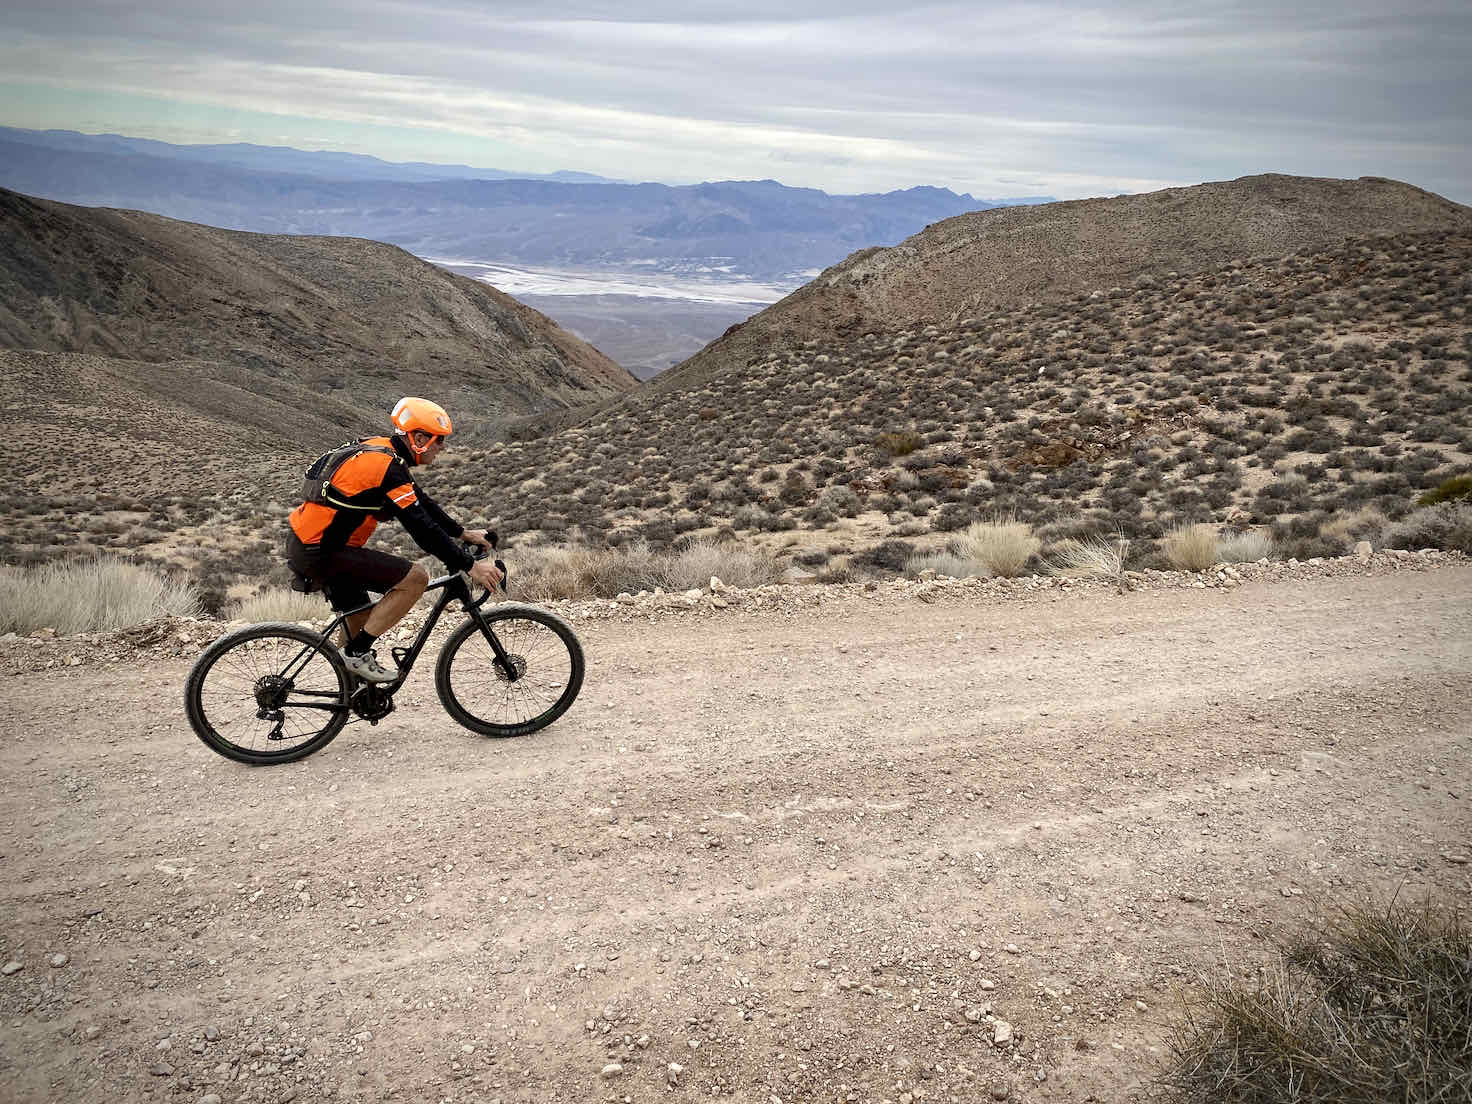 Gravel cyclist with the Death Valley basins in the background.